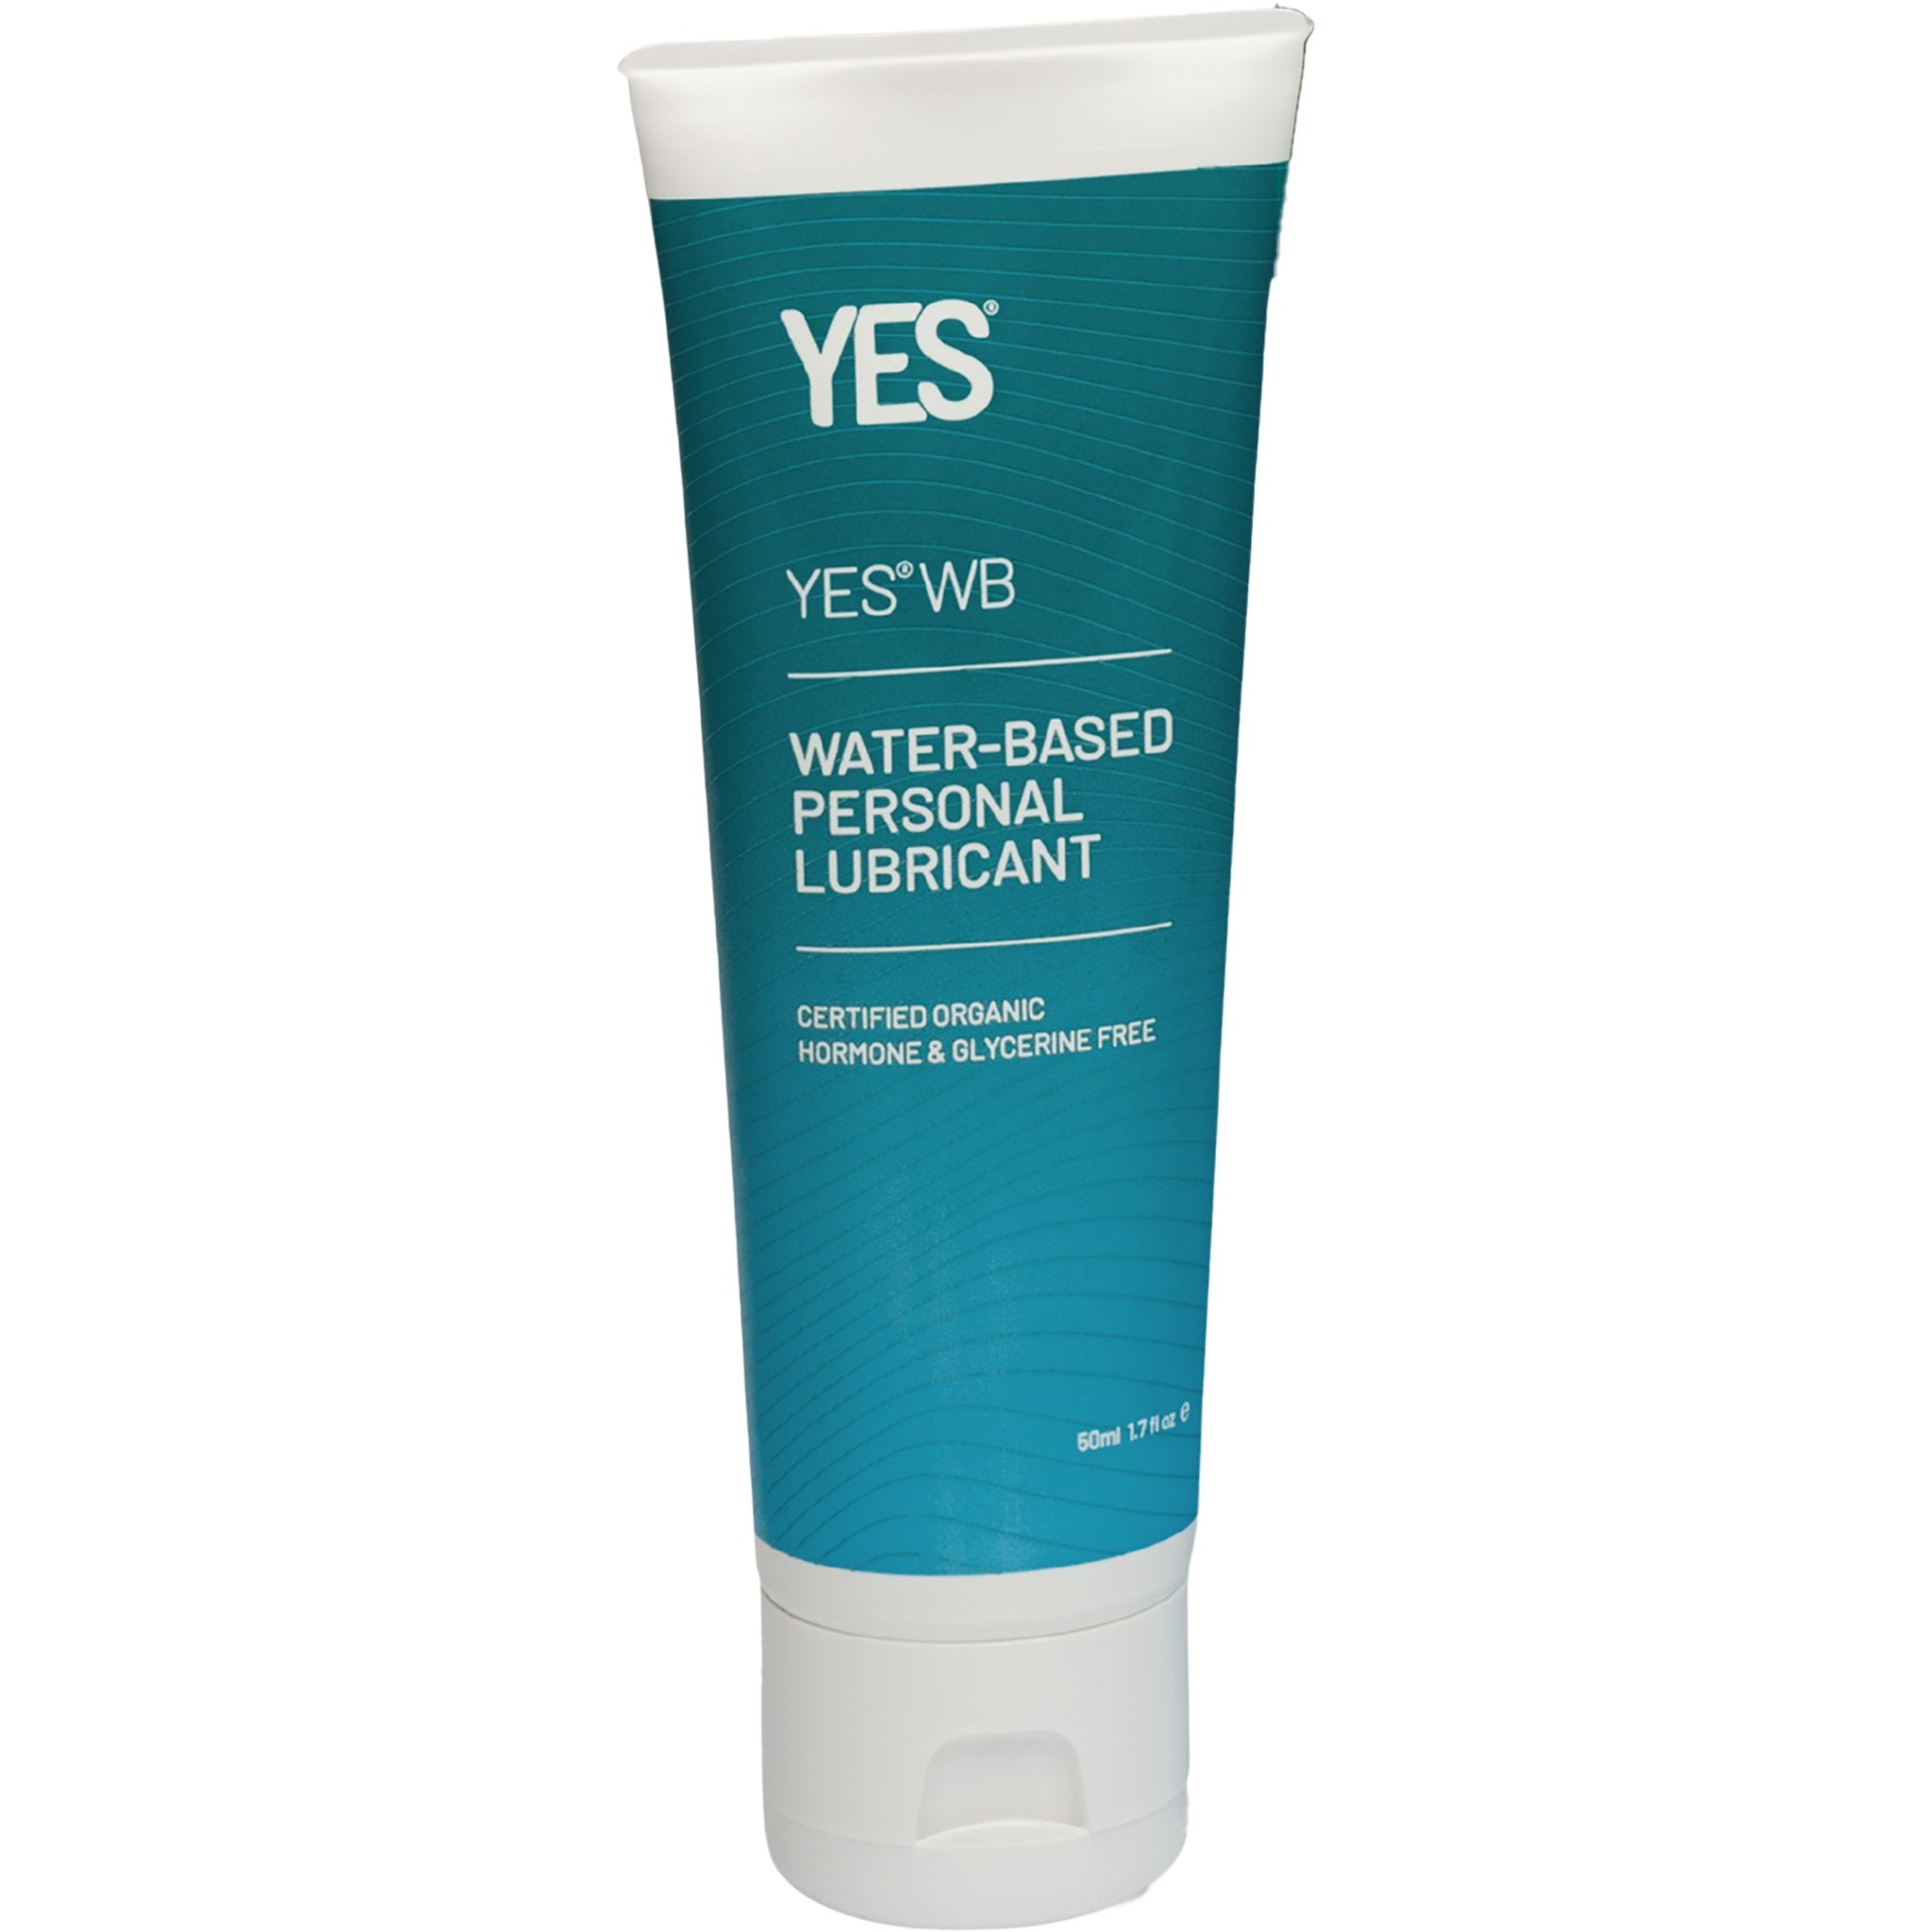 YES® Water-Based Organic Personal Lubricant - mypure.co.uk